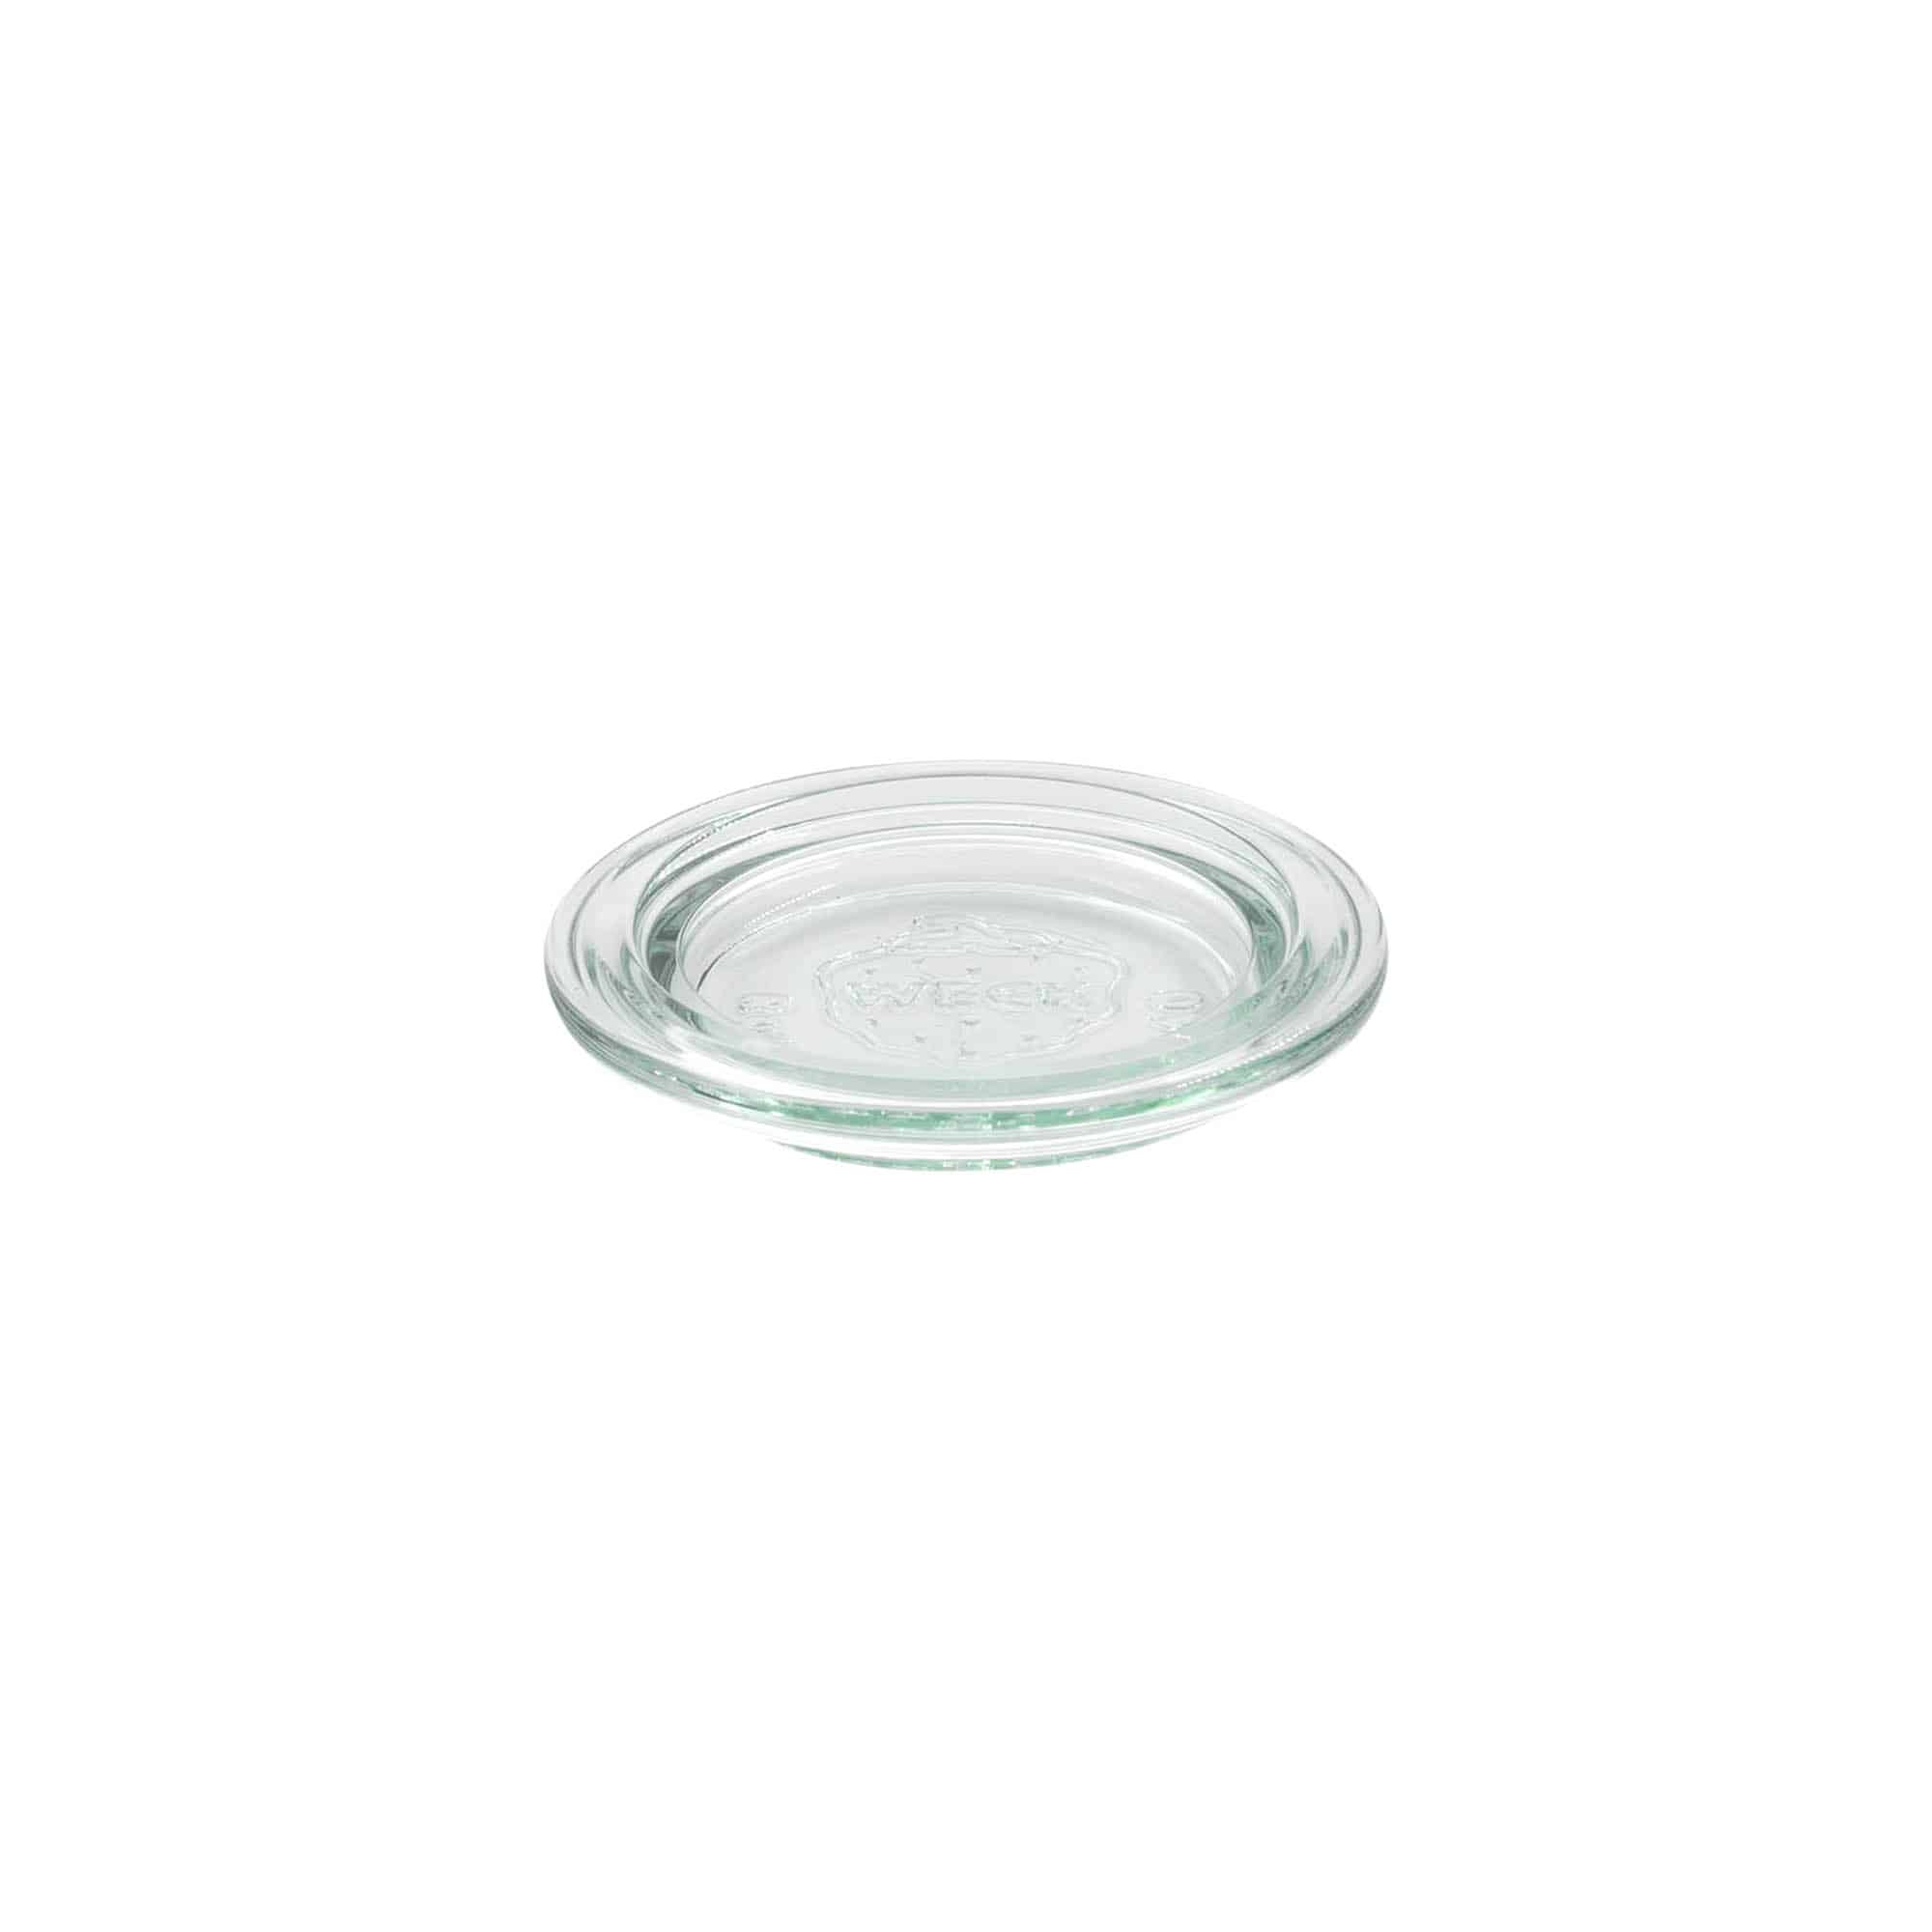 Lid for WECK round rim jar, for opening: RR60